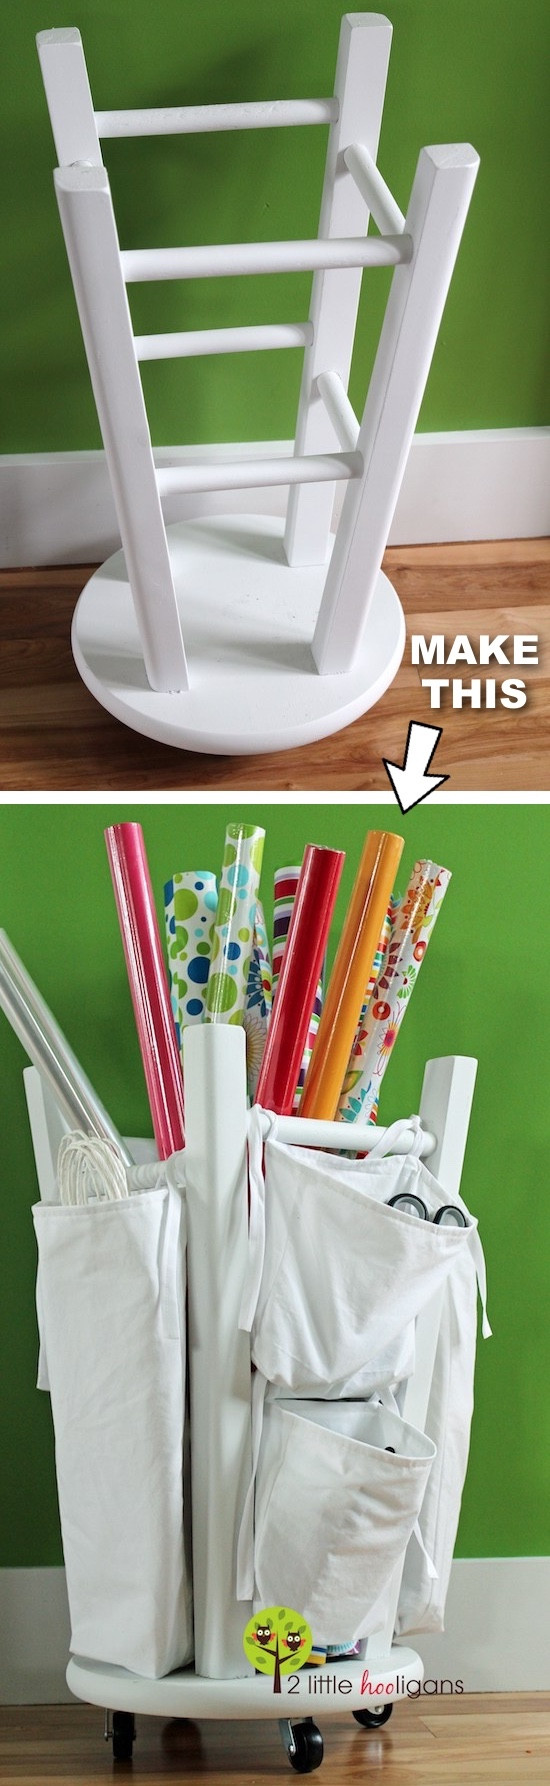 Paper Craft Ideas For Adults
 30 Easy Craft Ideas That Will Spark Your Creativity DIY